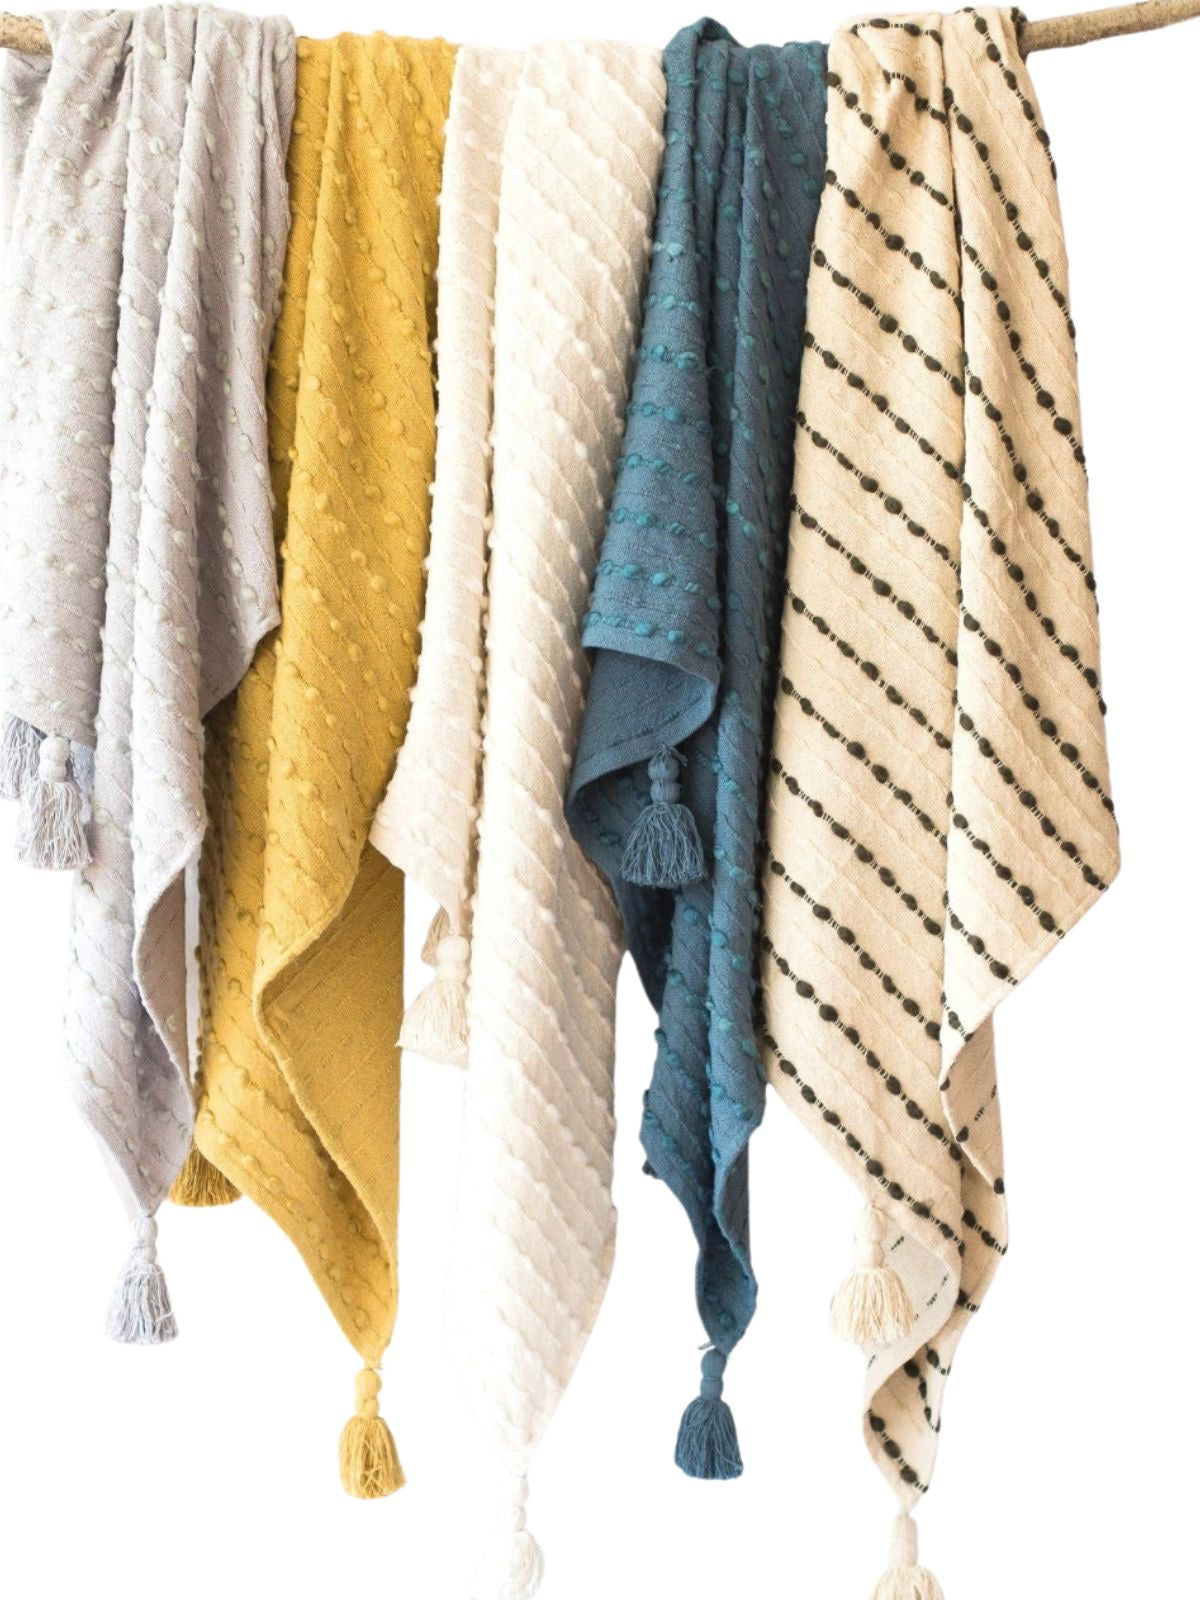 Decorative Throw Blankets Made with 80% Handwoven Cotton and 20% Acrylic Available in 4 Hand-dyed Colors, 50W x 60L.